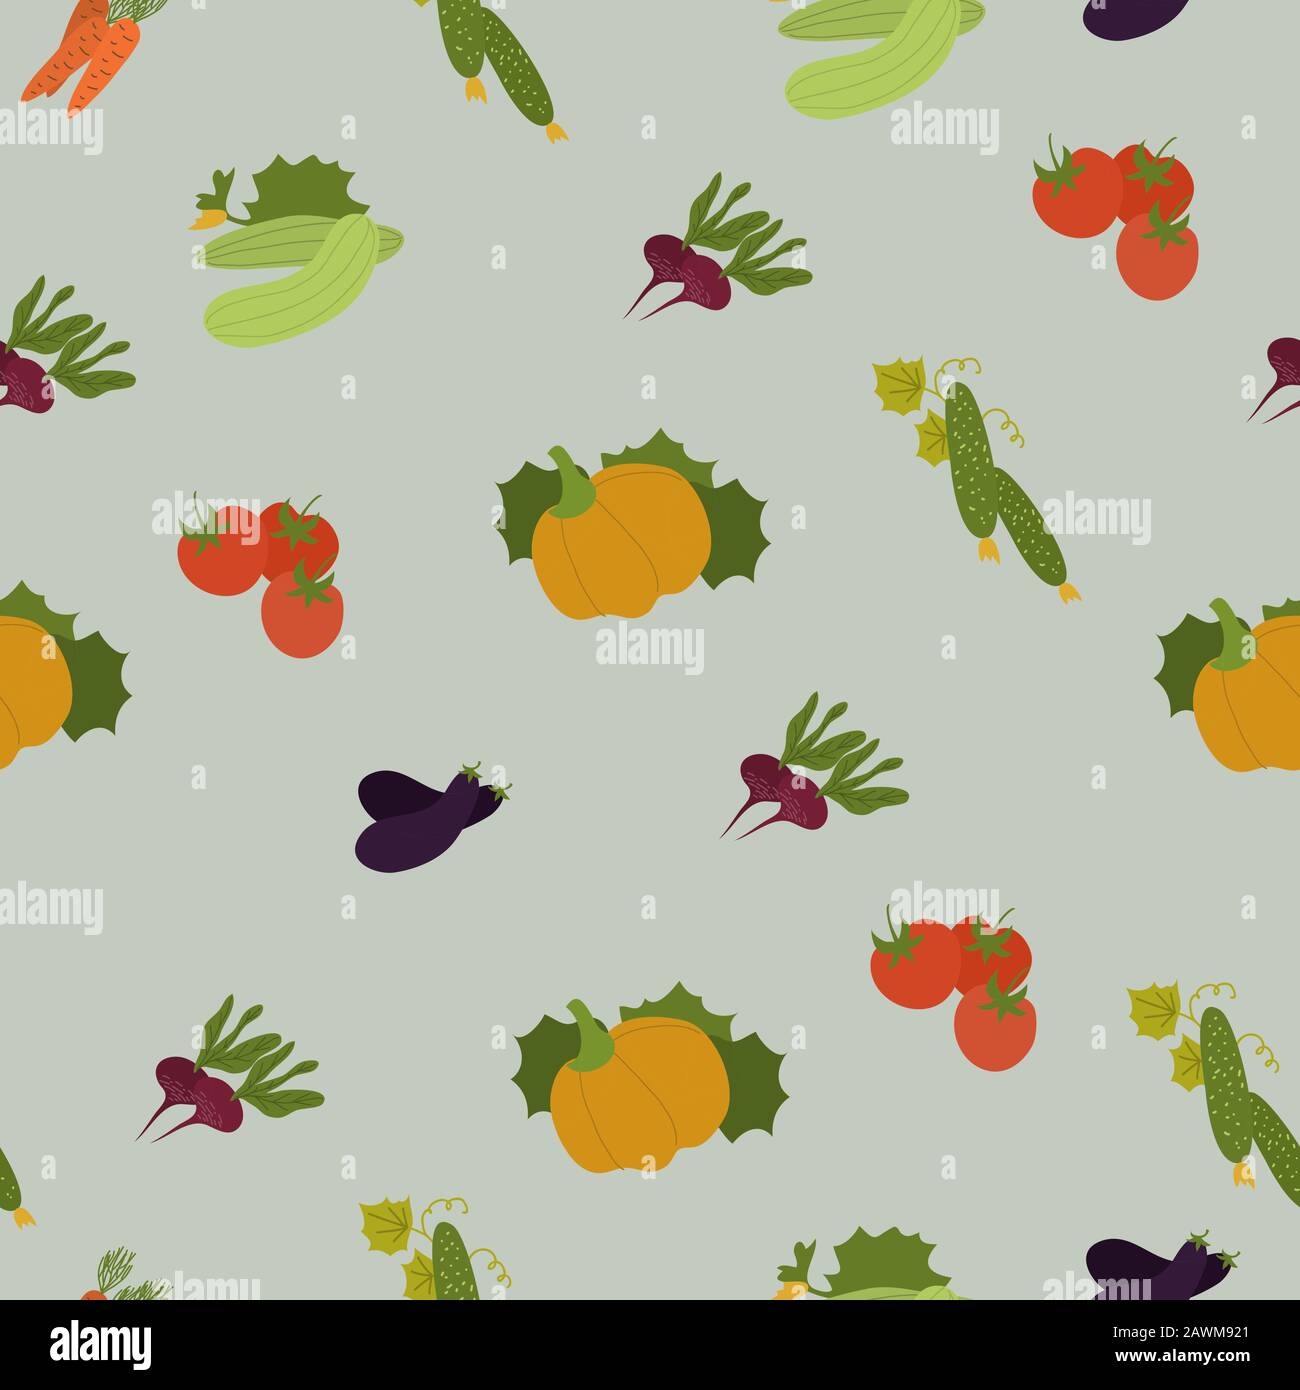 Seamless pattern with organic vegetables. Squash, cucamber, tomato, eggplant, pumpkin and carrot. Organic food background. Stock Vector